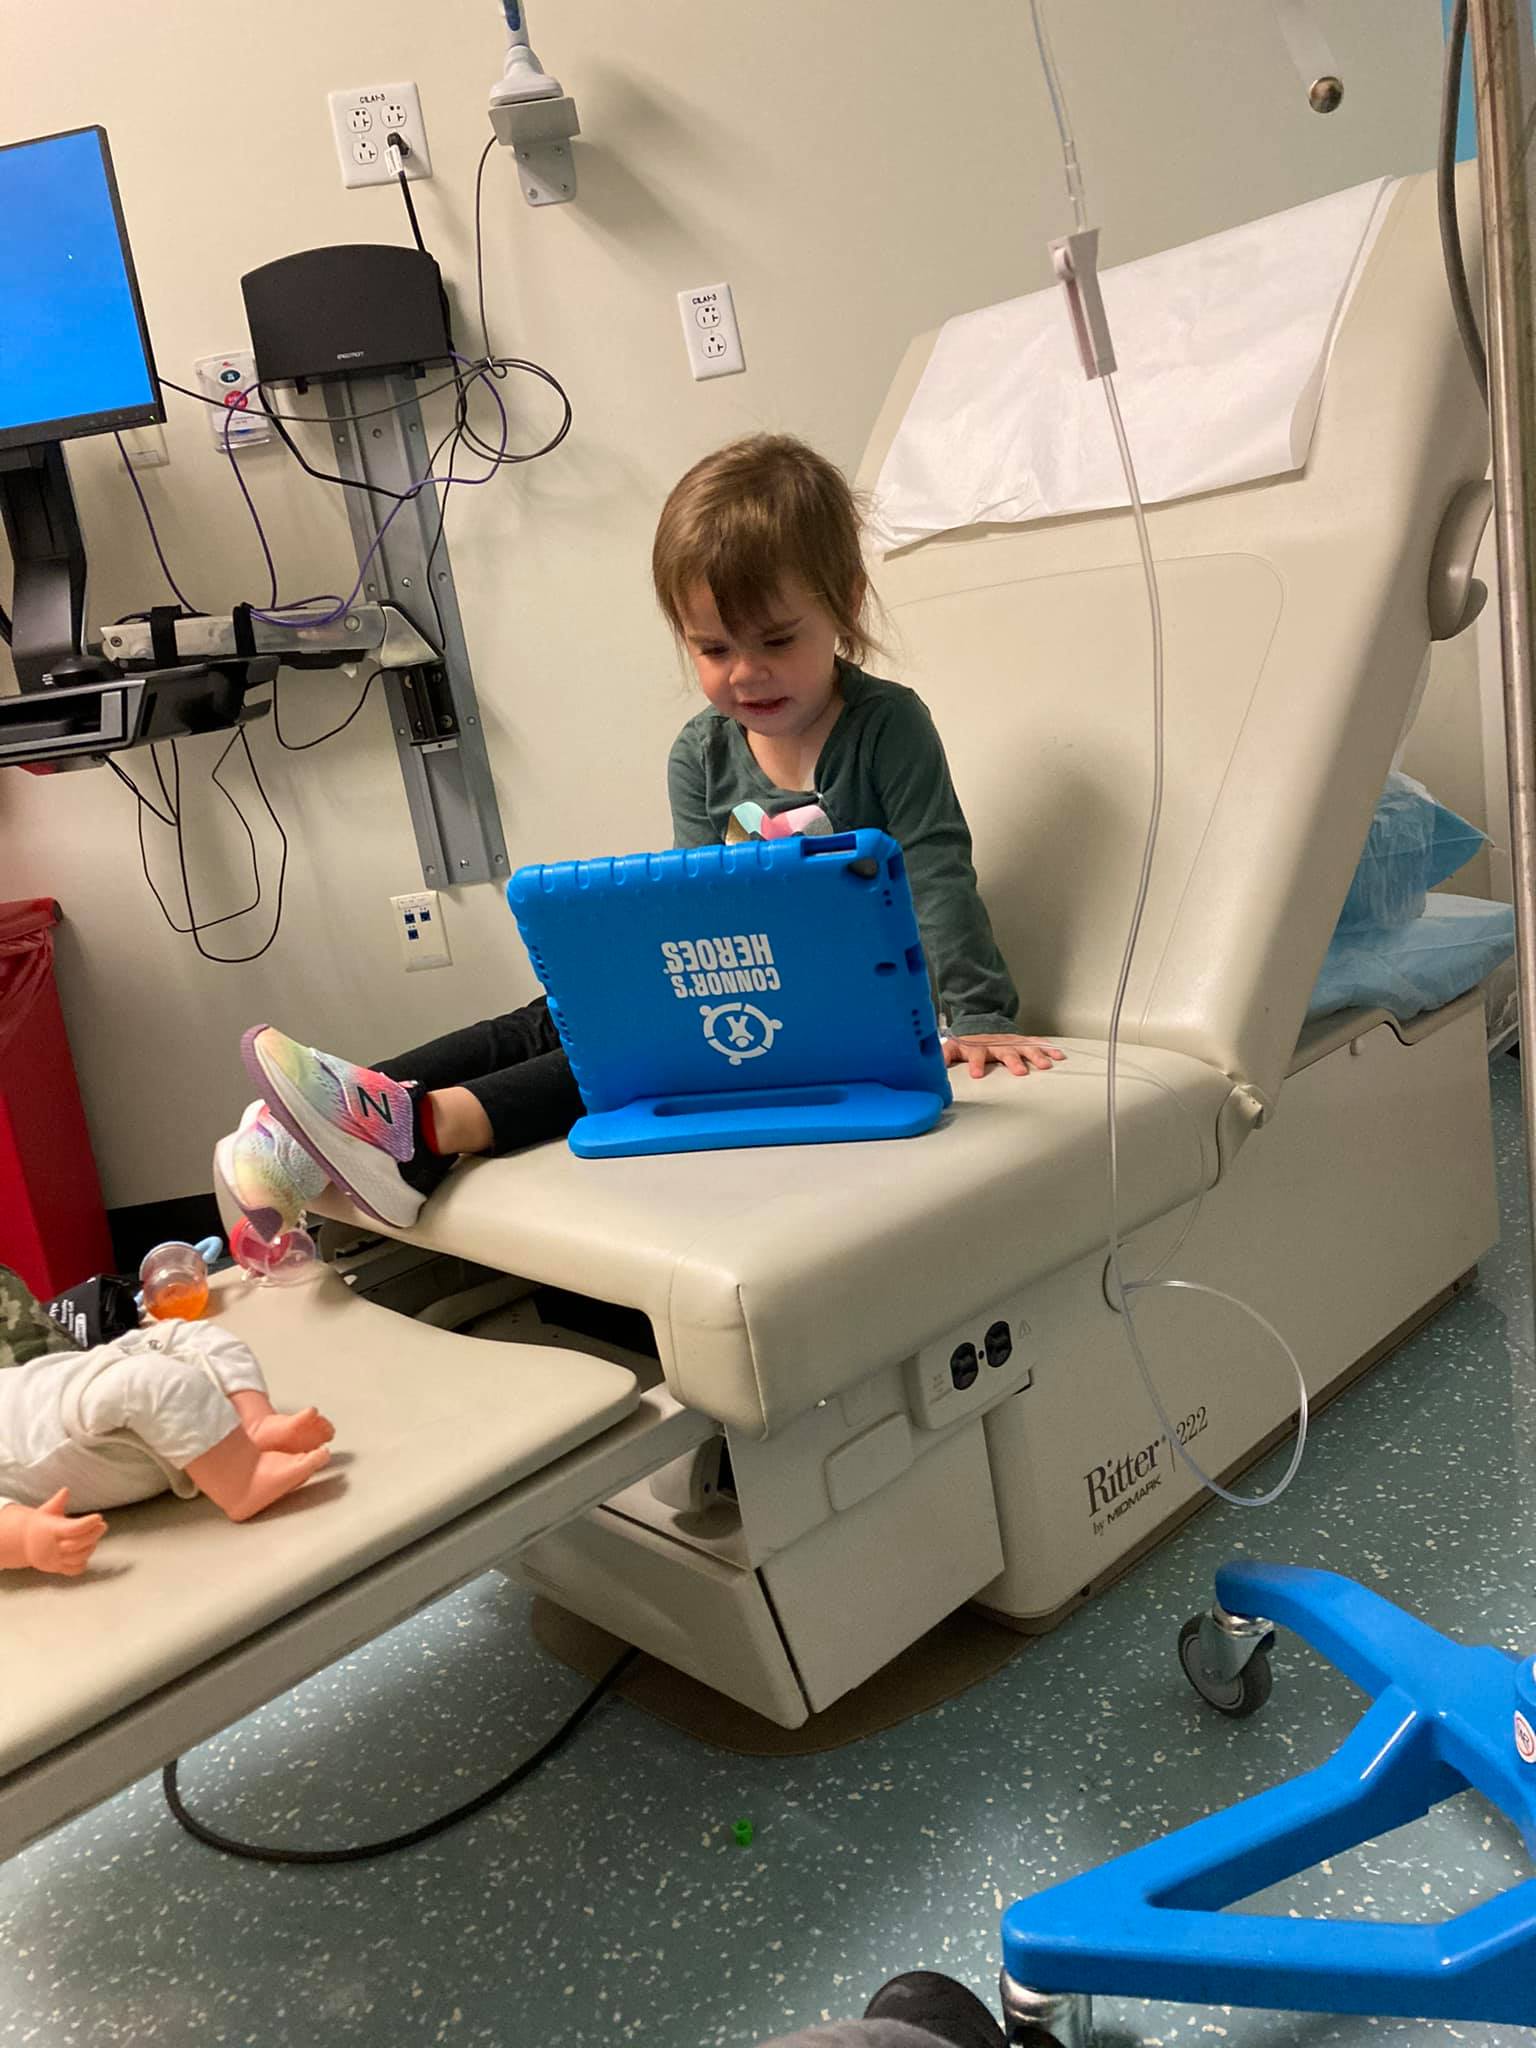 In a hospital room is a child looking at a tablet while getting an infusion